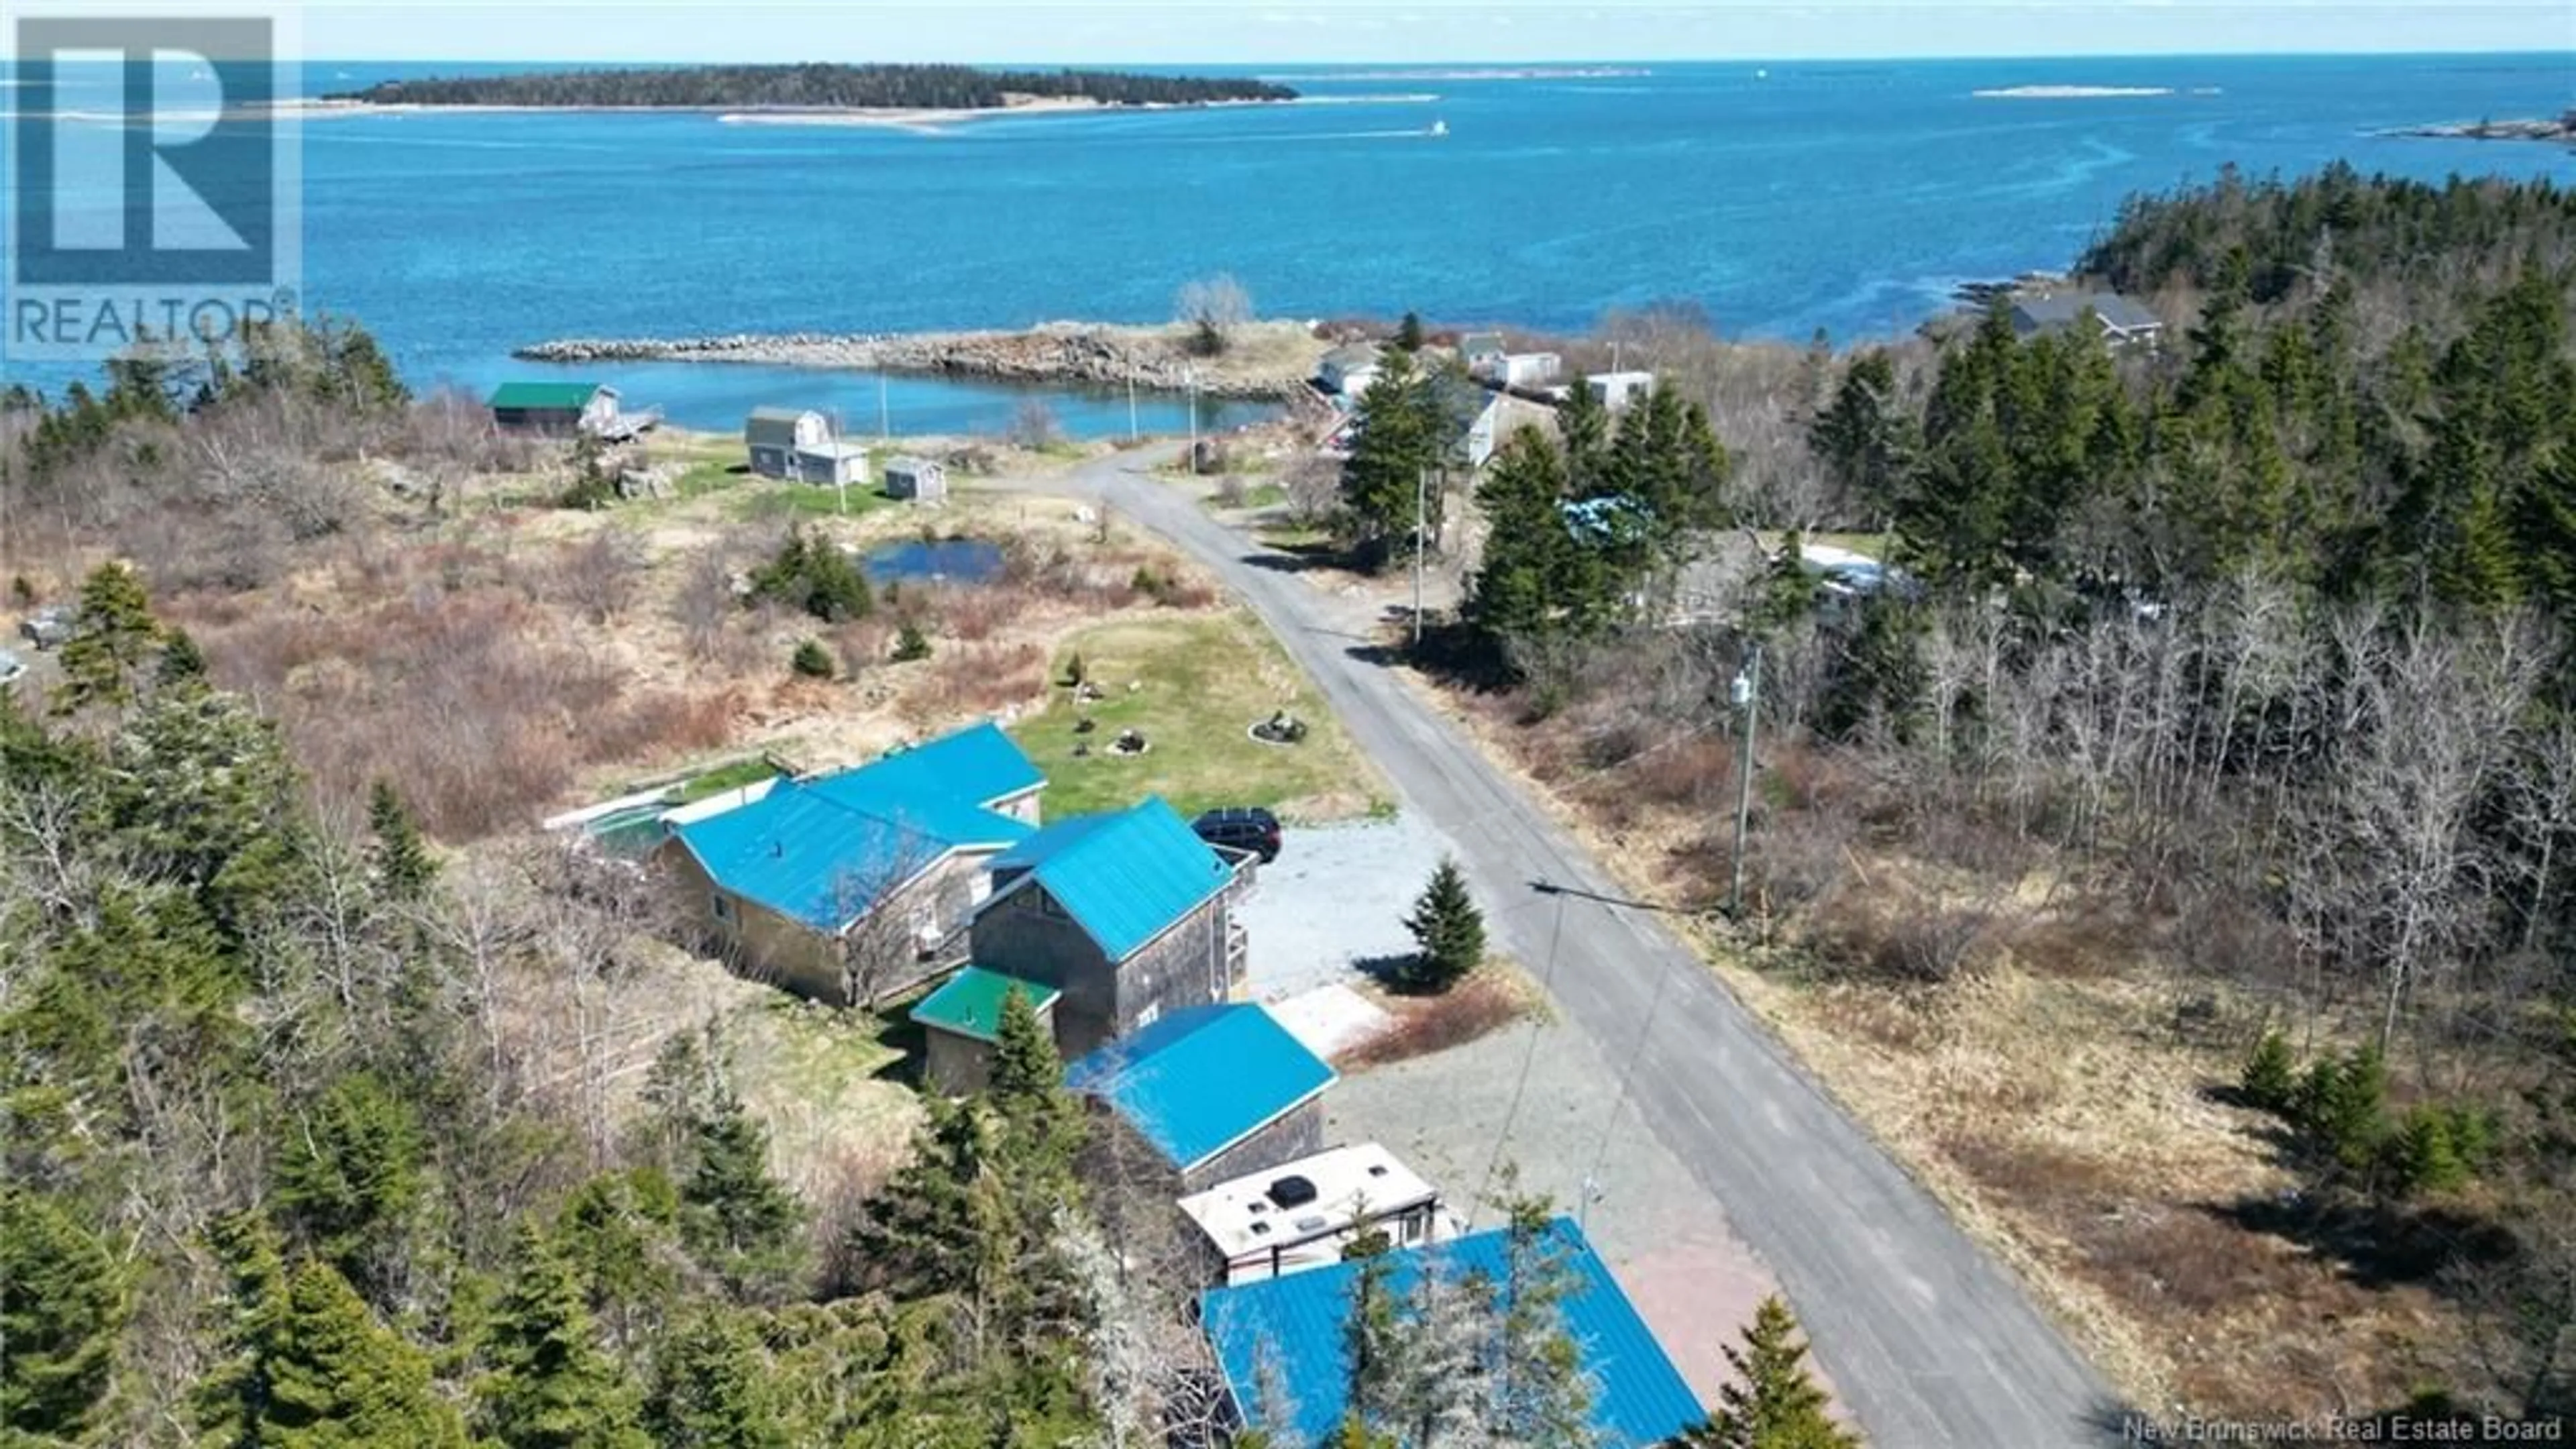 Lakeview for 11 Cook Road, Grand Manan New Brunswick E5G4E3